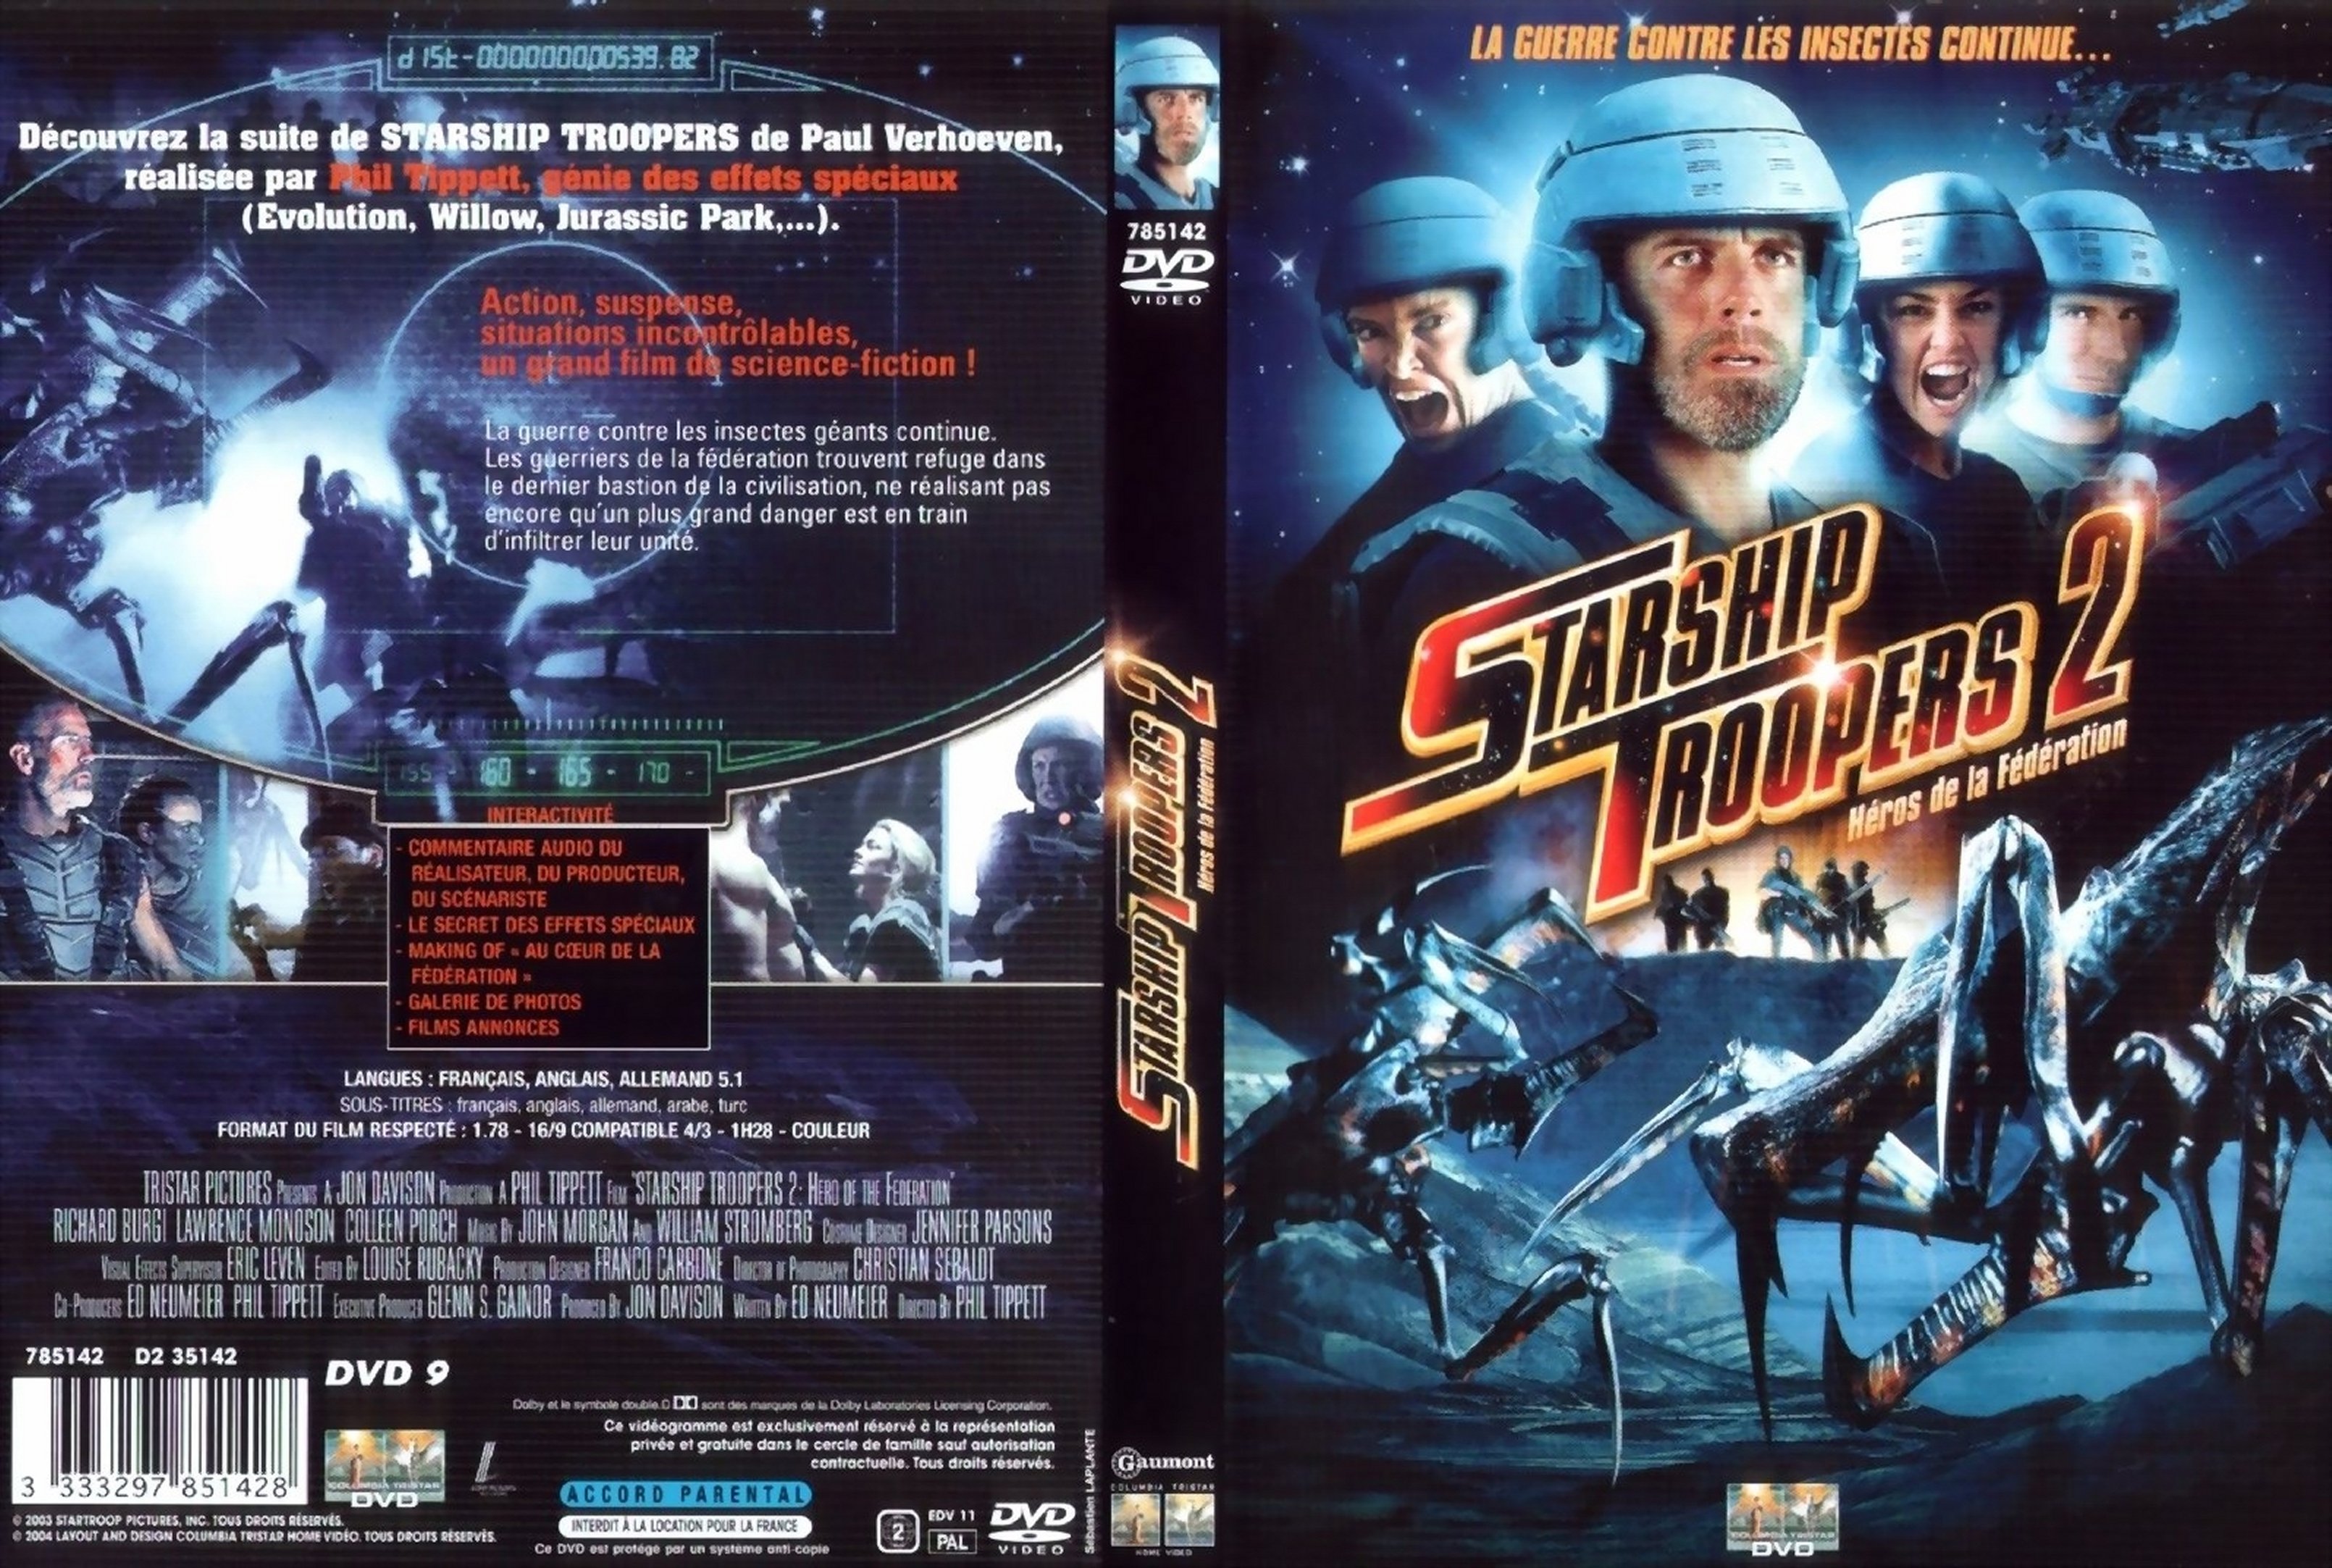 Jaquette DVD Starship troopers 2